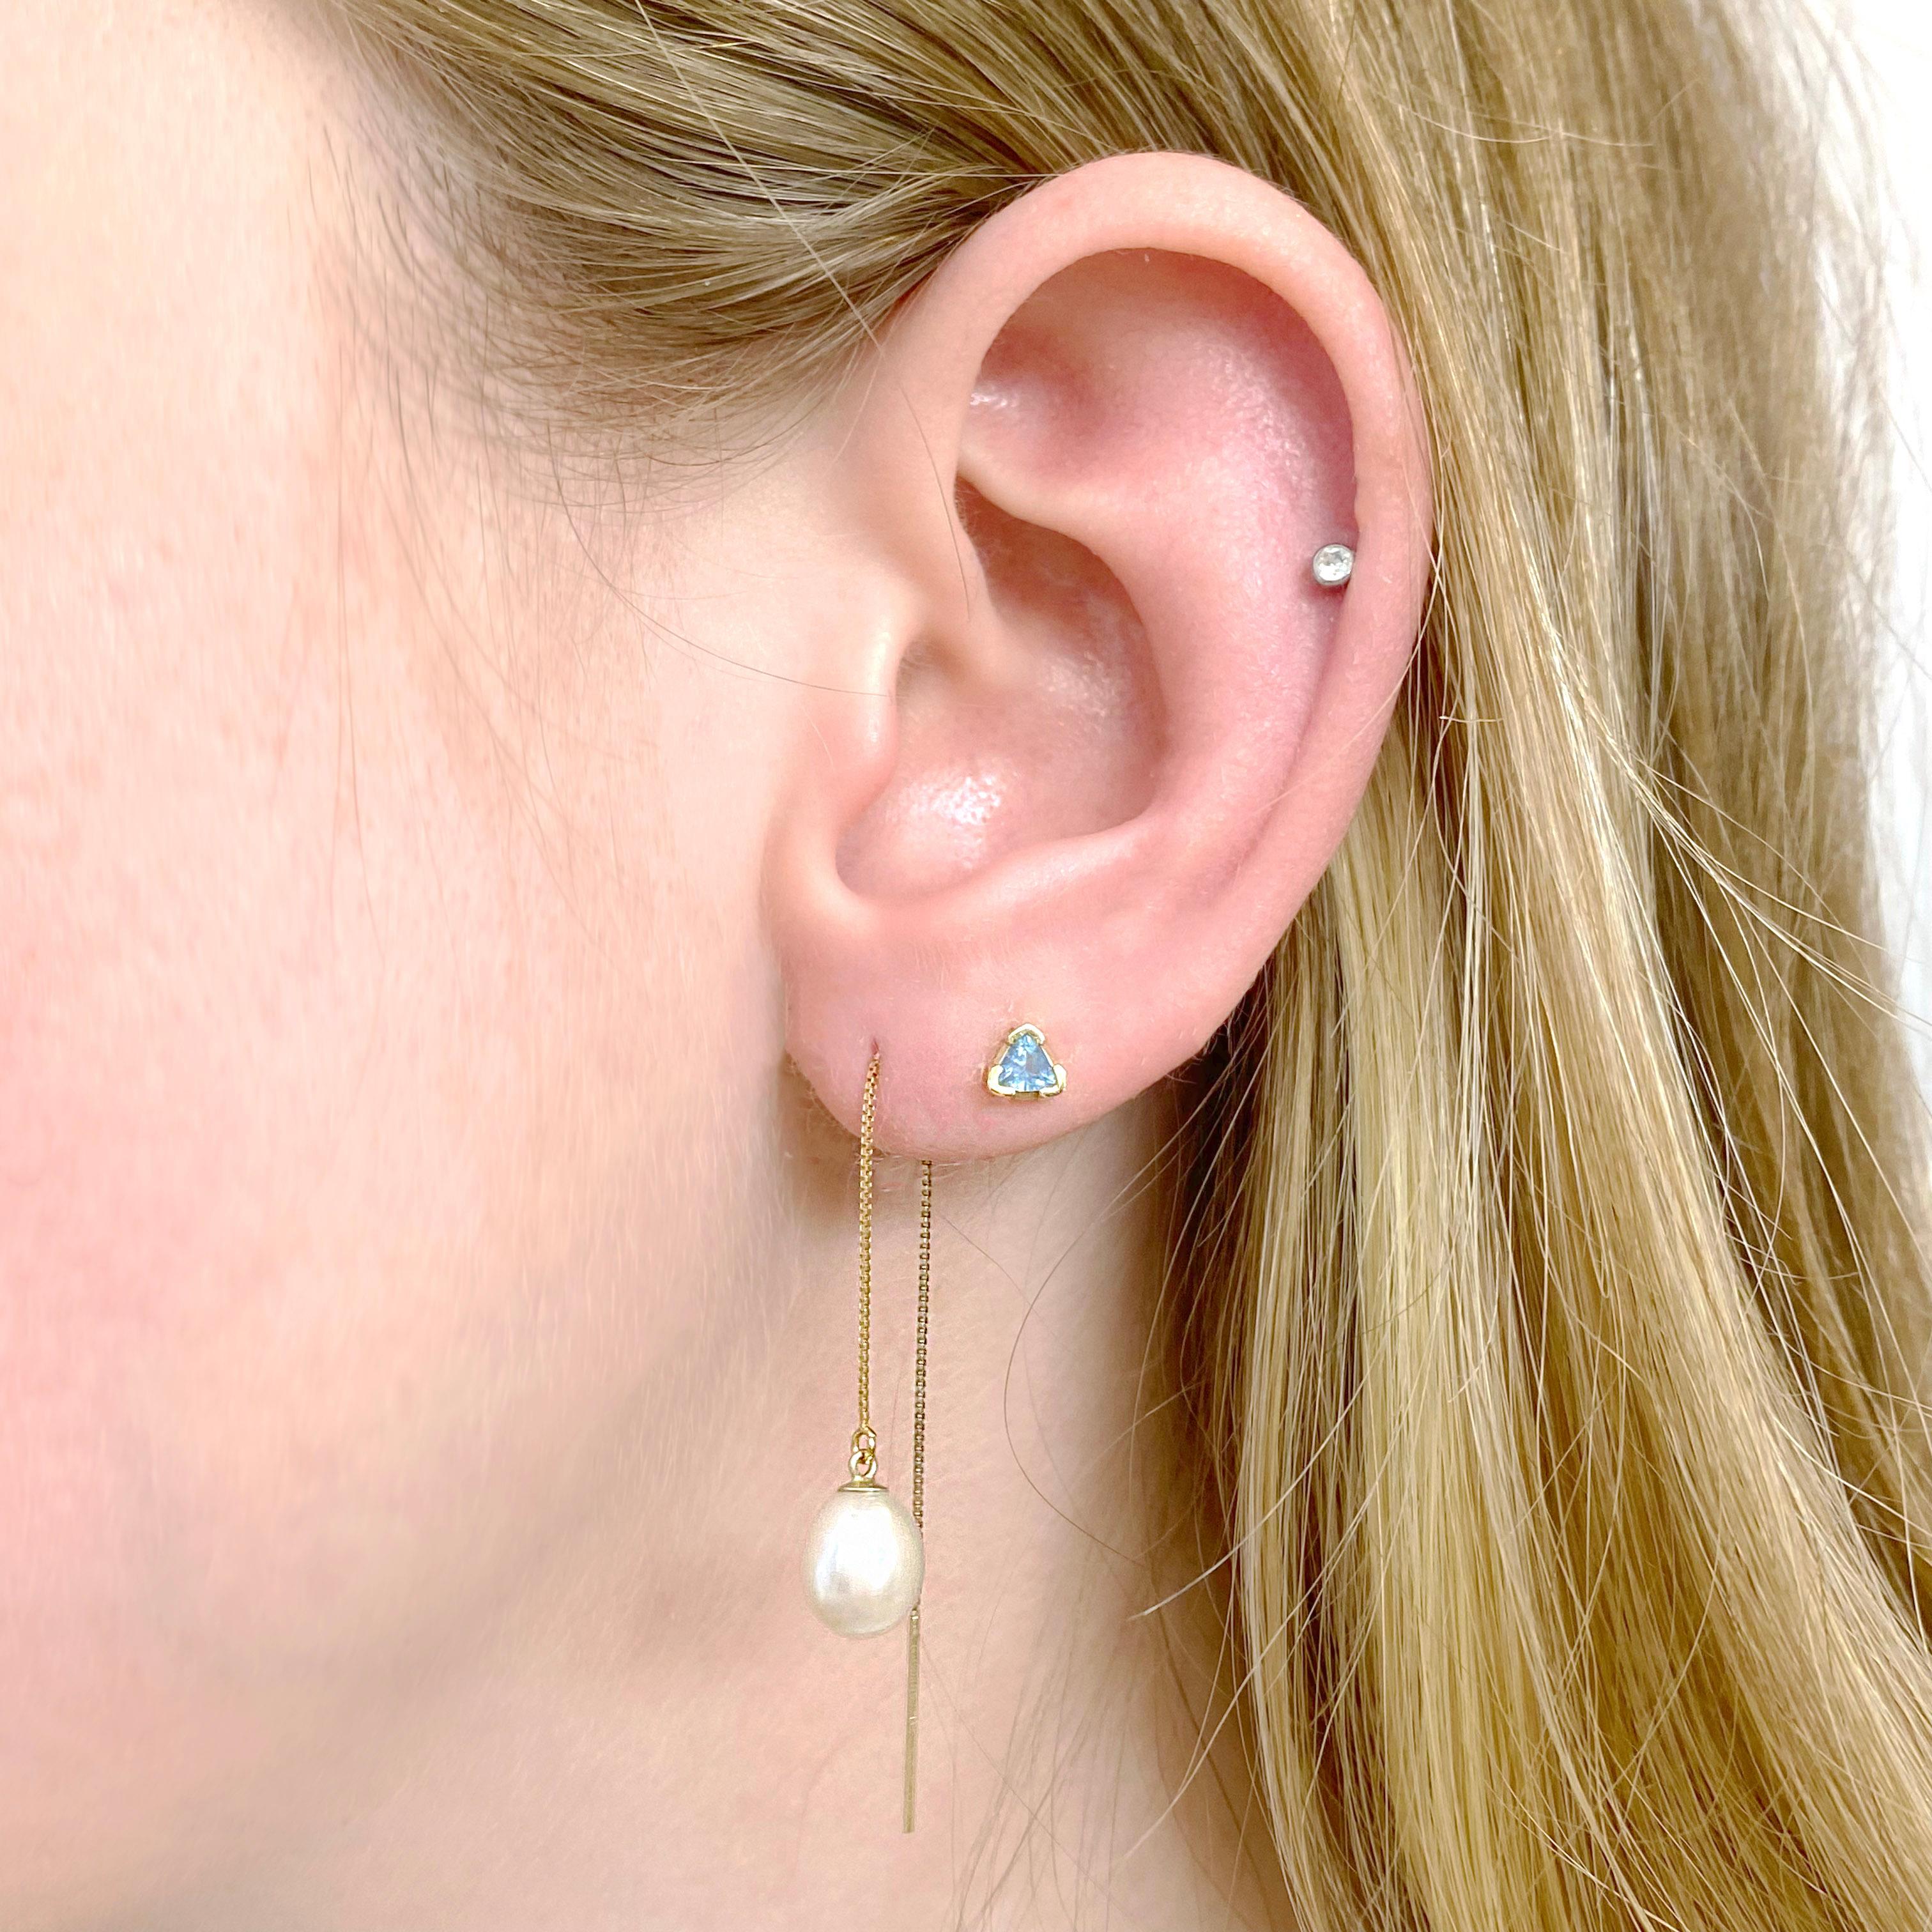 Threaders are the perfect look for 2022! These earring threaders are constructed out of 14 karat yellow gold chain that has a gold par on the end to make it easy to put on. The pearls on the front have a slight teardrop shape and are an ideal match.